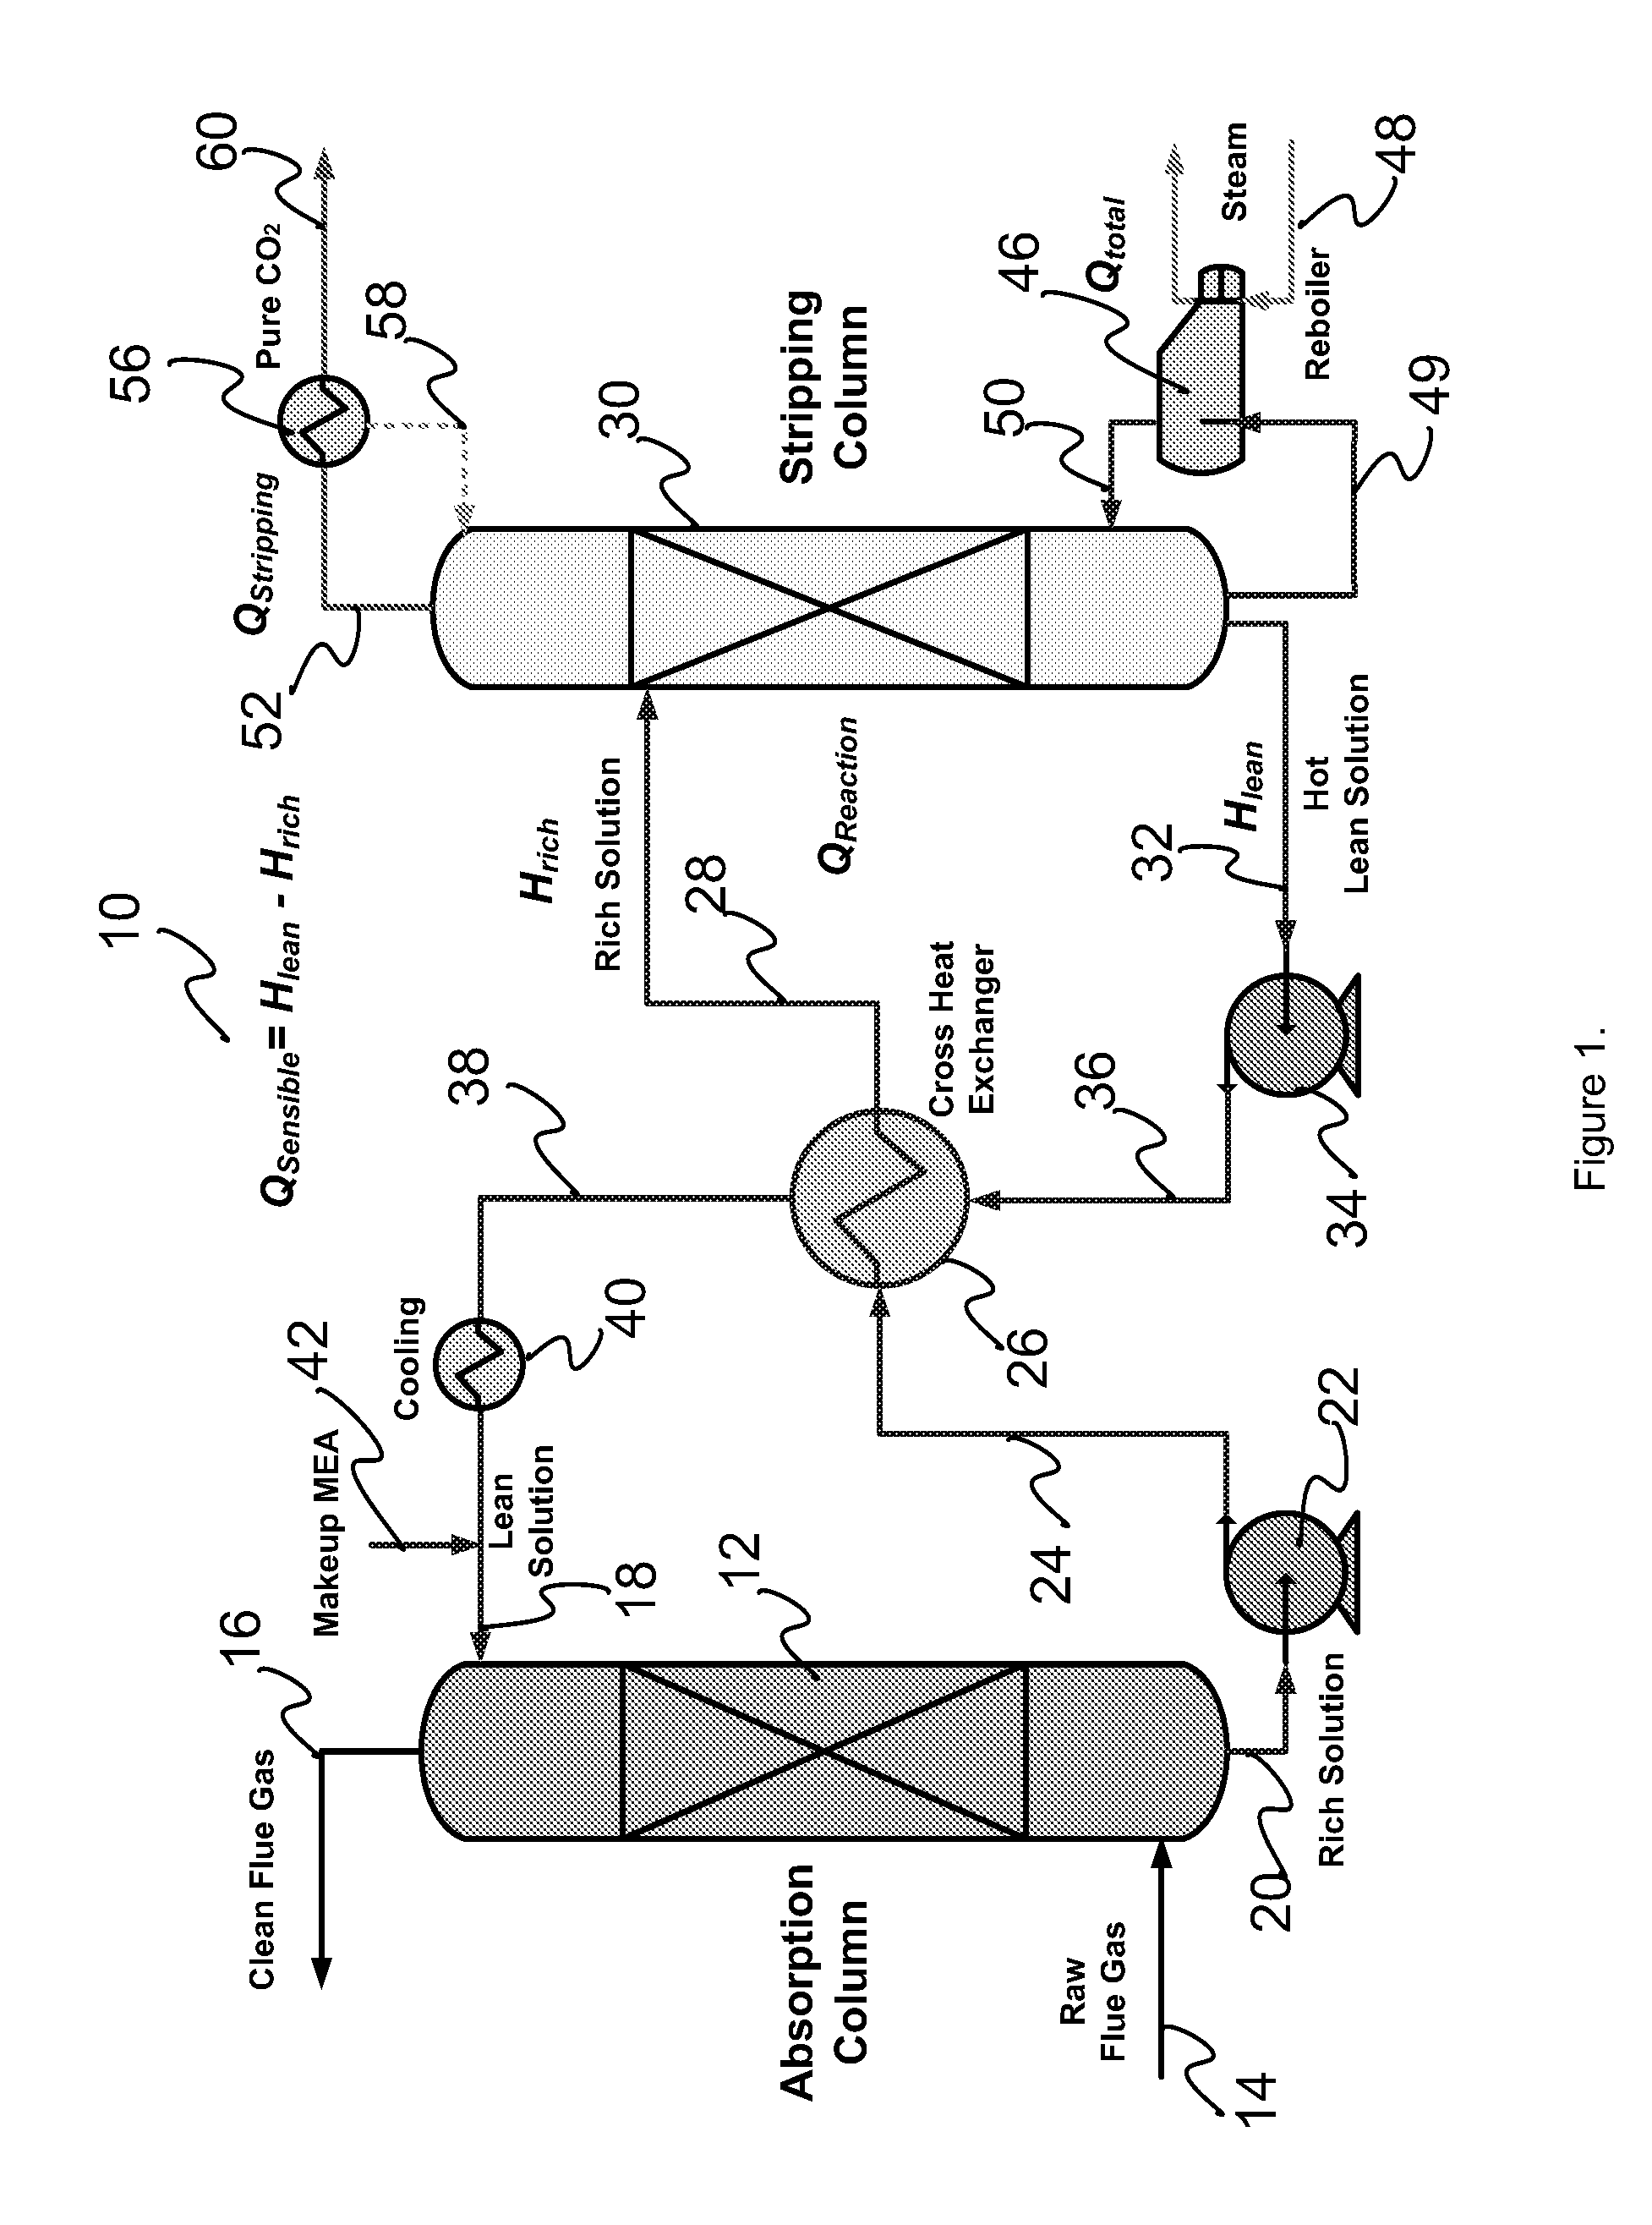 Gas pressurized separation column and process to generate a high pressure product gas